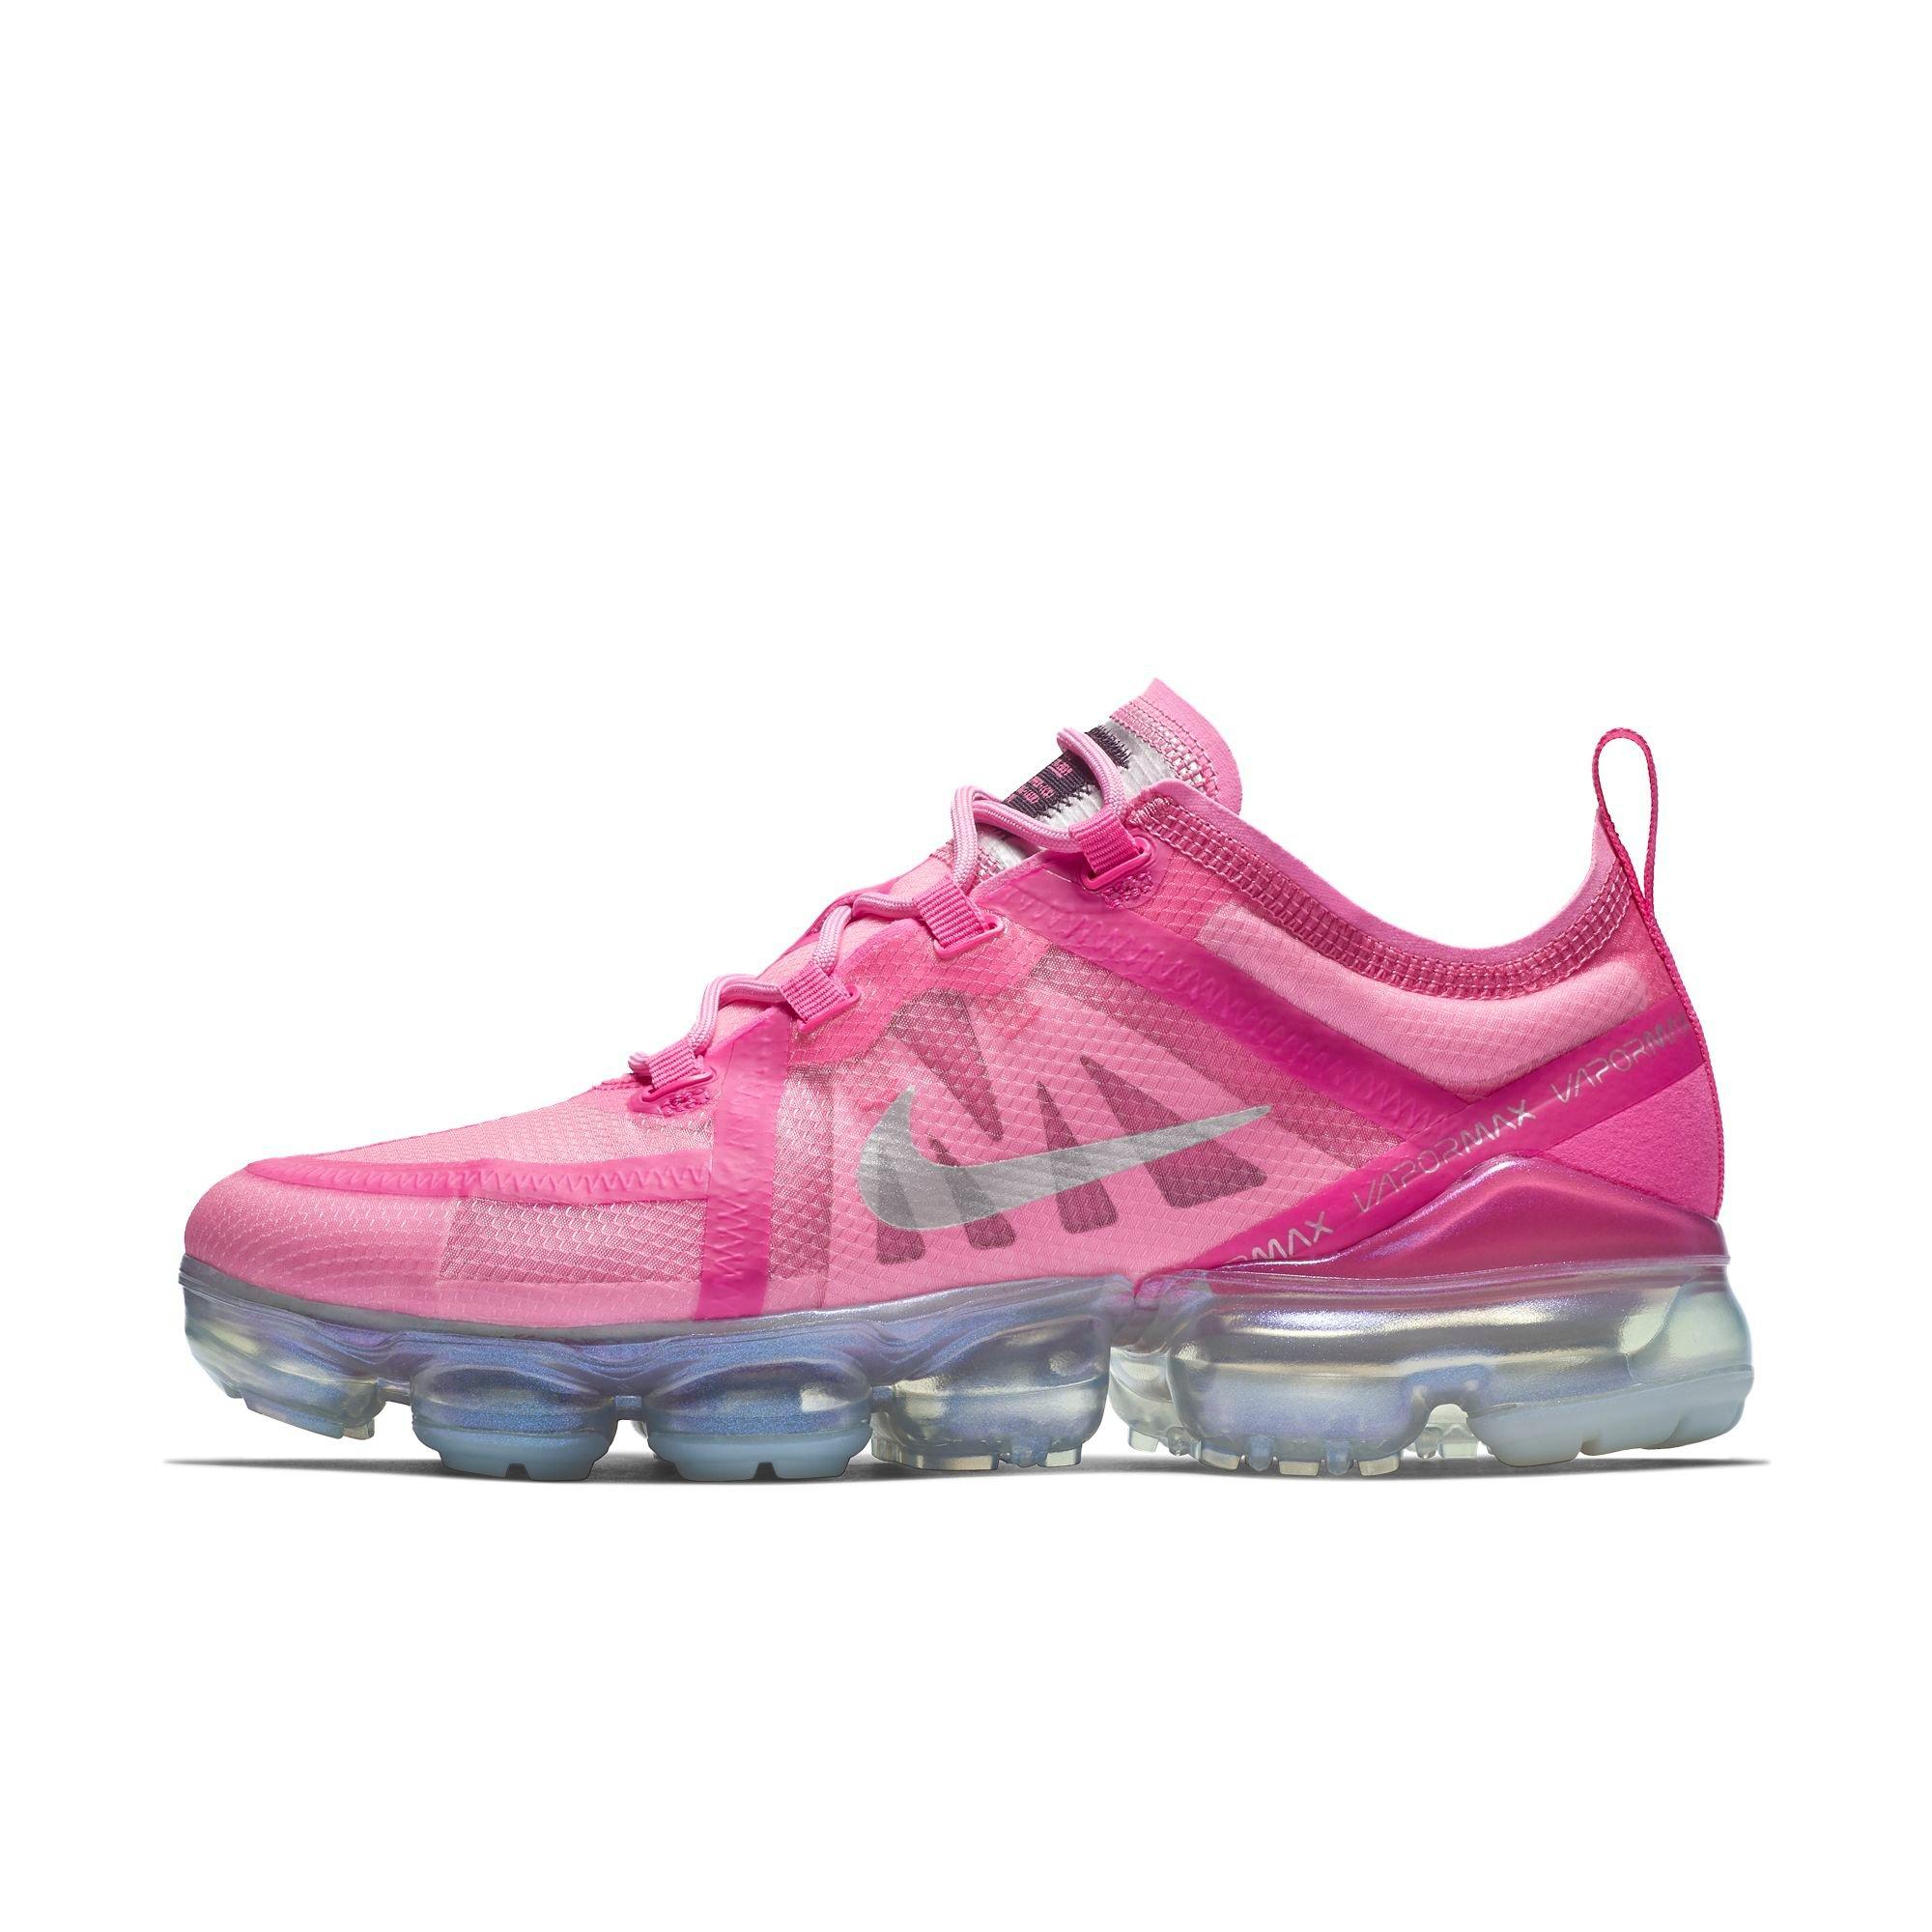 nike vapormax 2019 pink Shop Clothing & Shoes Online